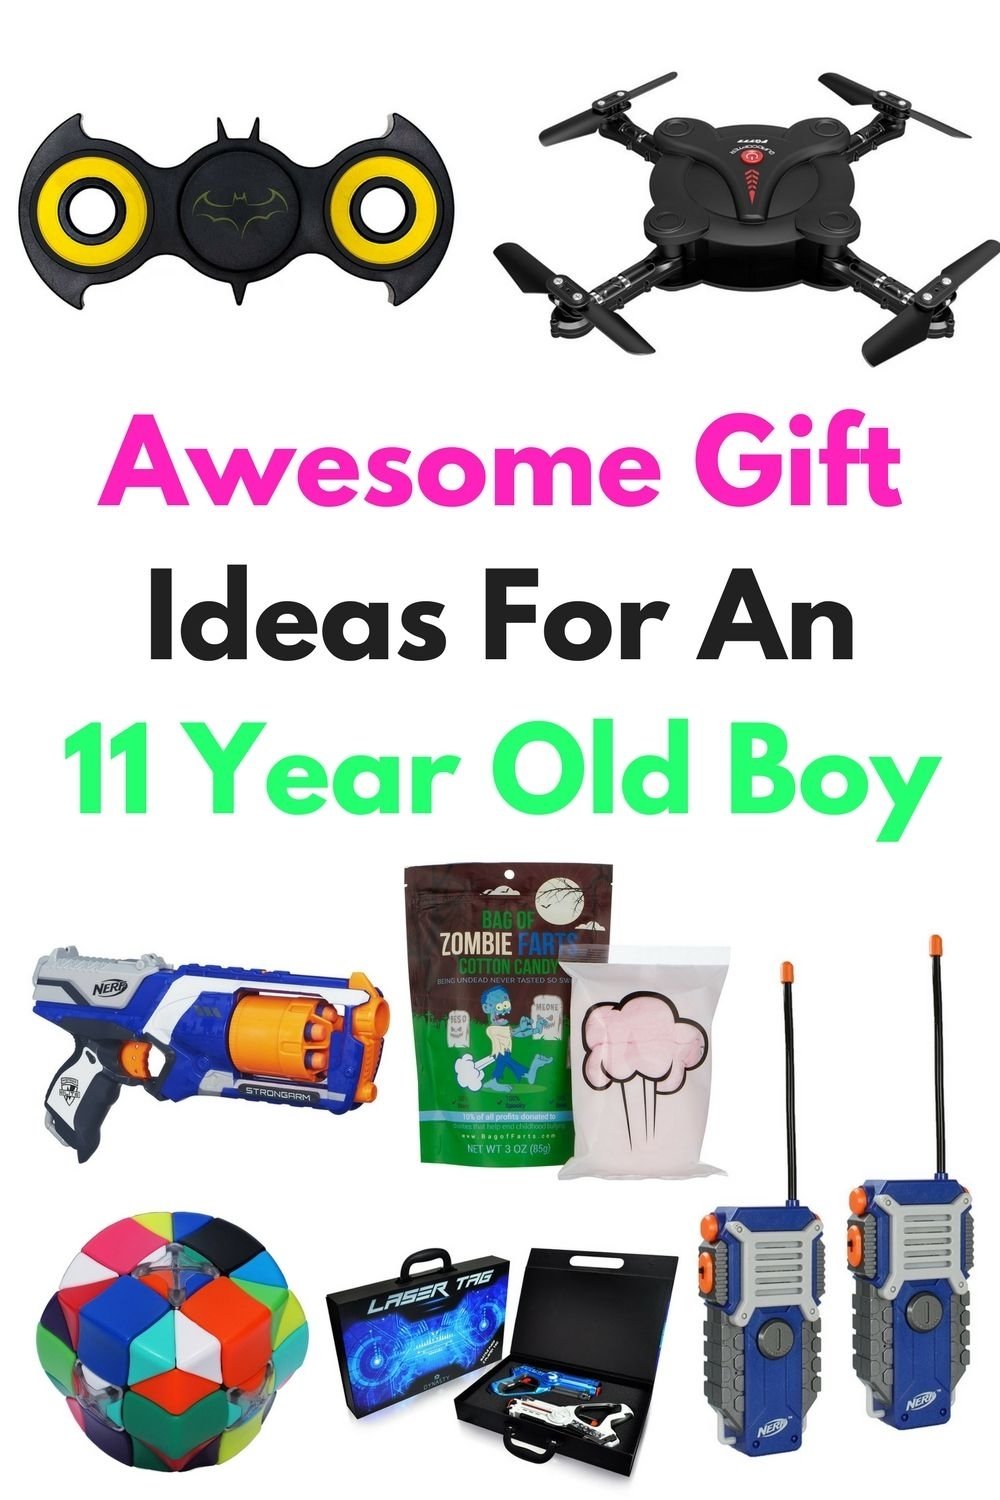 10 Cute Gift Ideas For 12 Year Old Boys awesome gift ideas for an 11 year old boy awesome gifts easter 2022